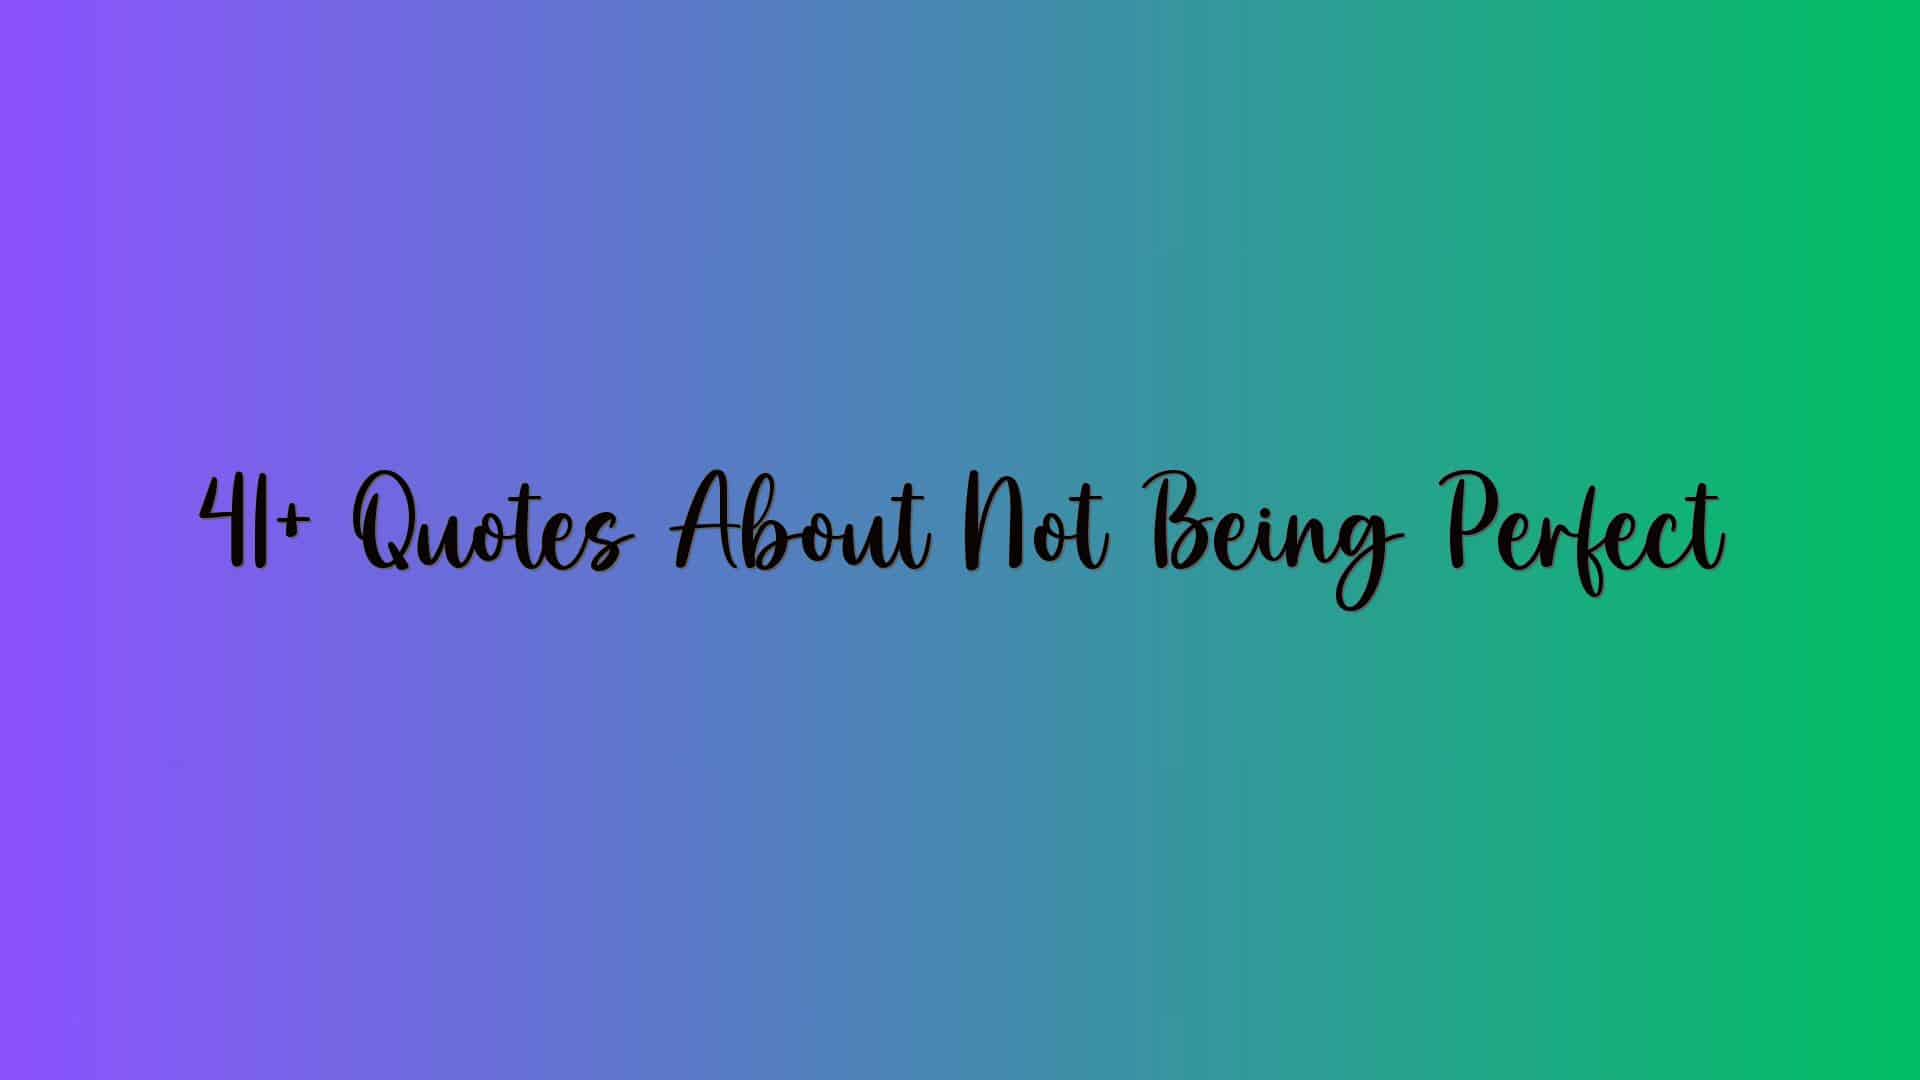 41+ Quotes About Not Being Perfect